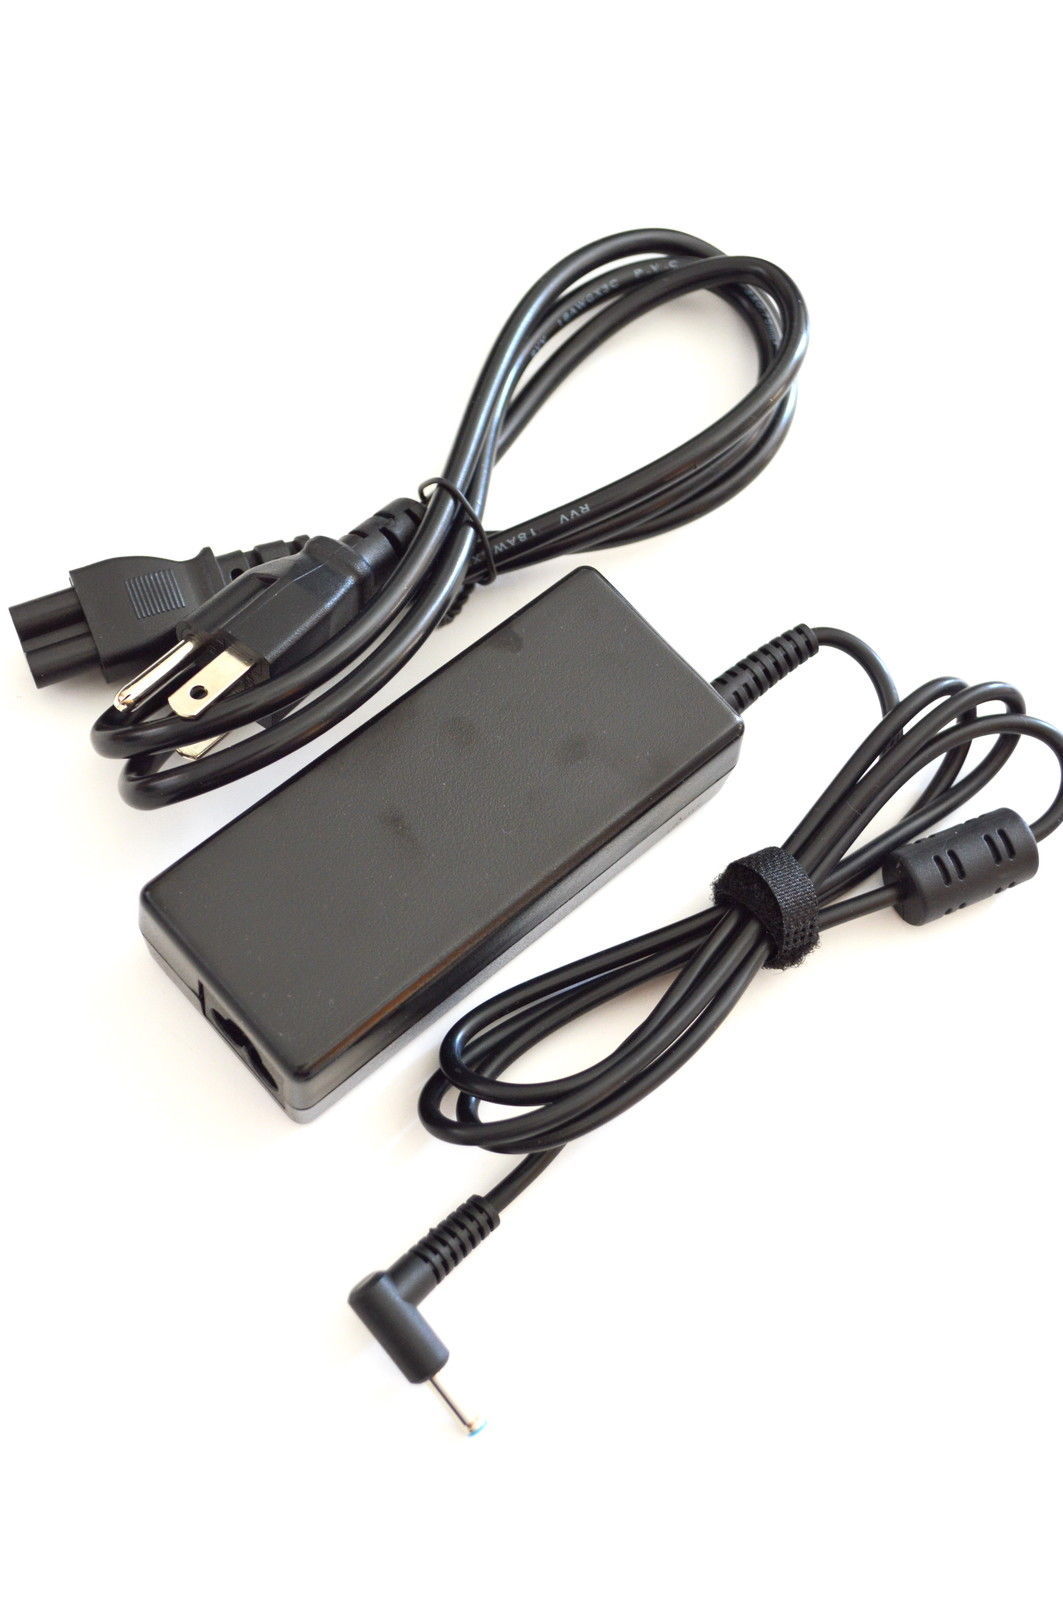 Primary image for AC Adapter Charger for HP Pavilion 17-g153us 17-g161us 17-g188ca Laptop Power